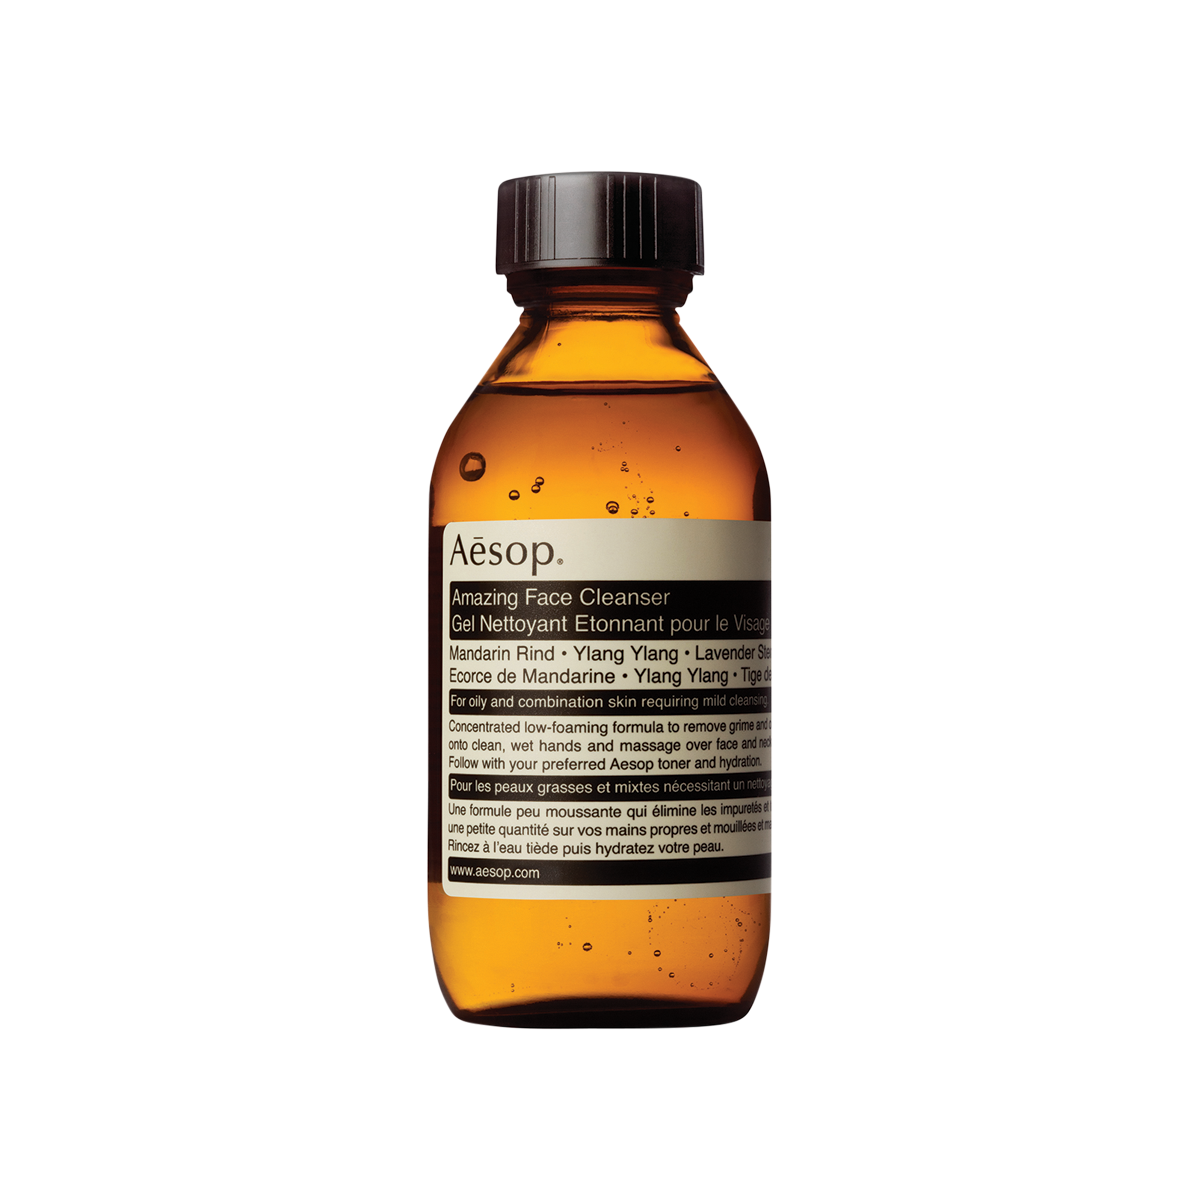 Aesop - Amazing Face Cleanser Travel Size